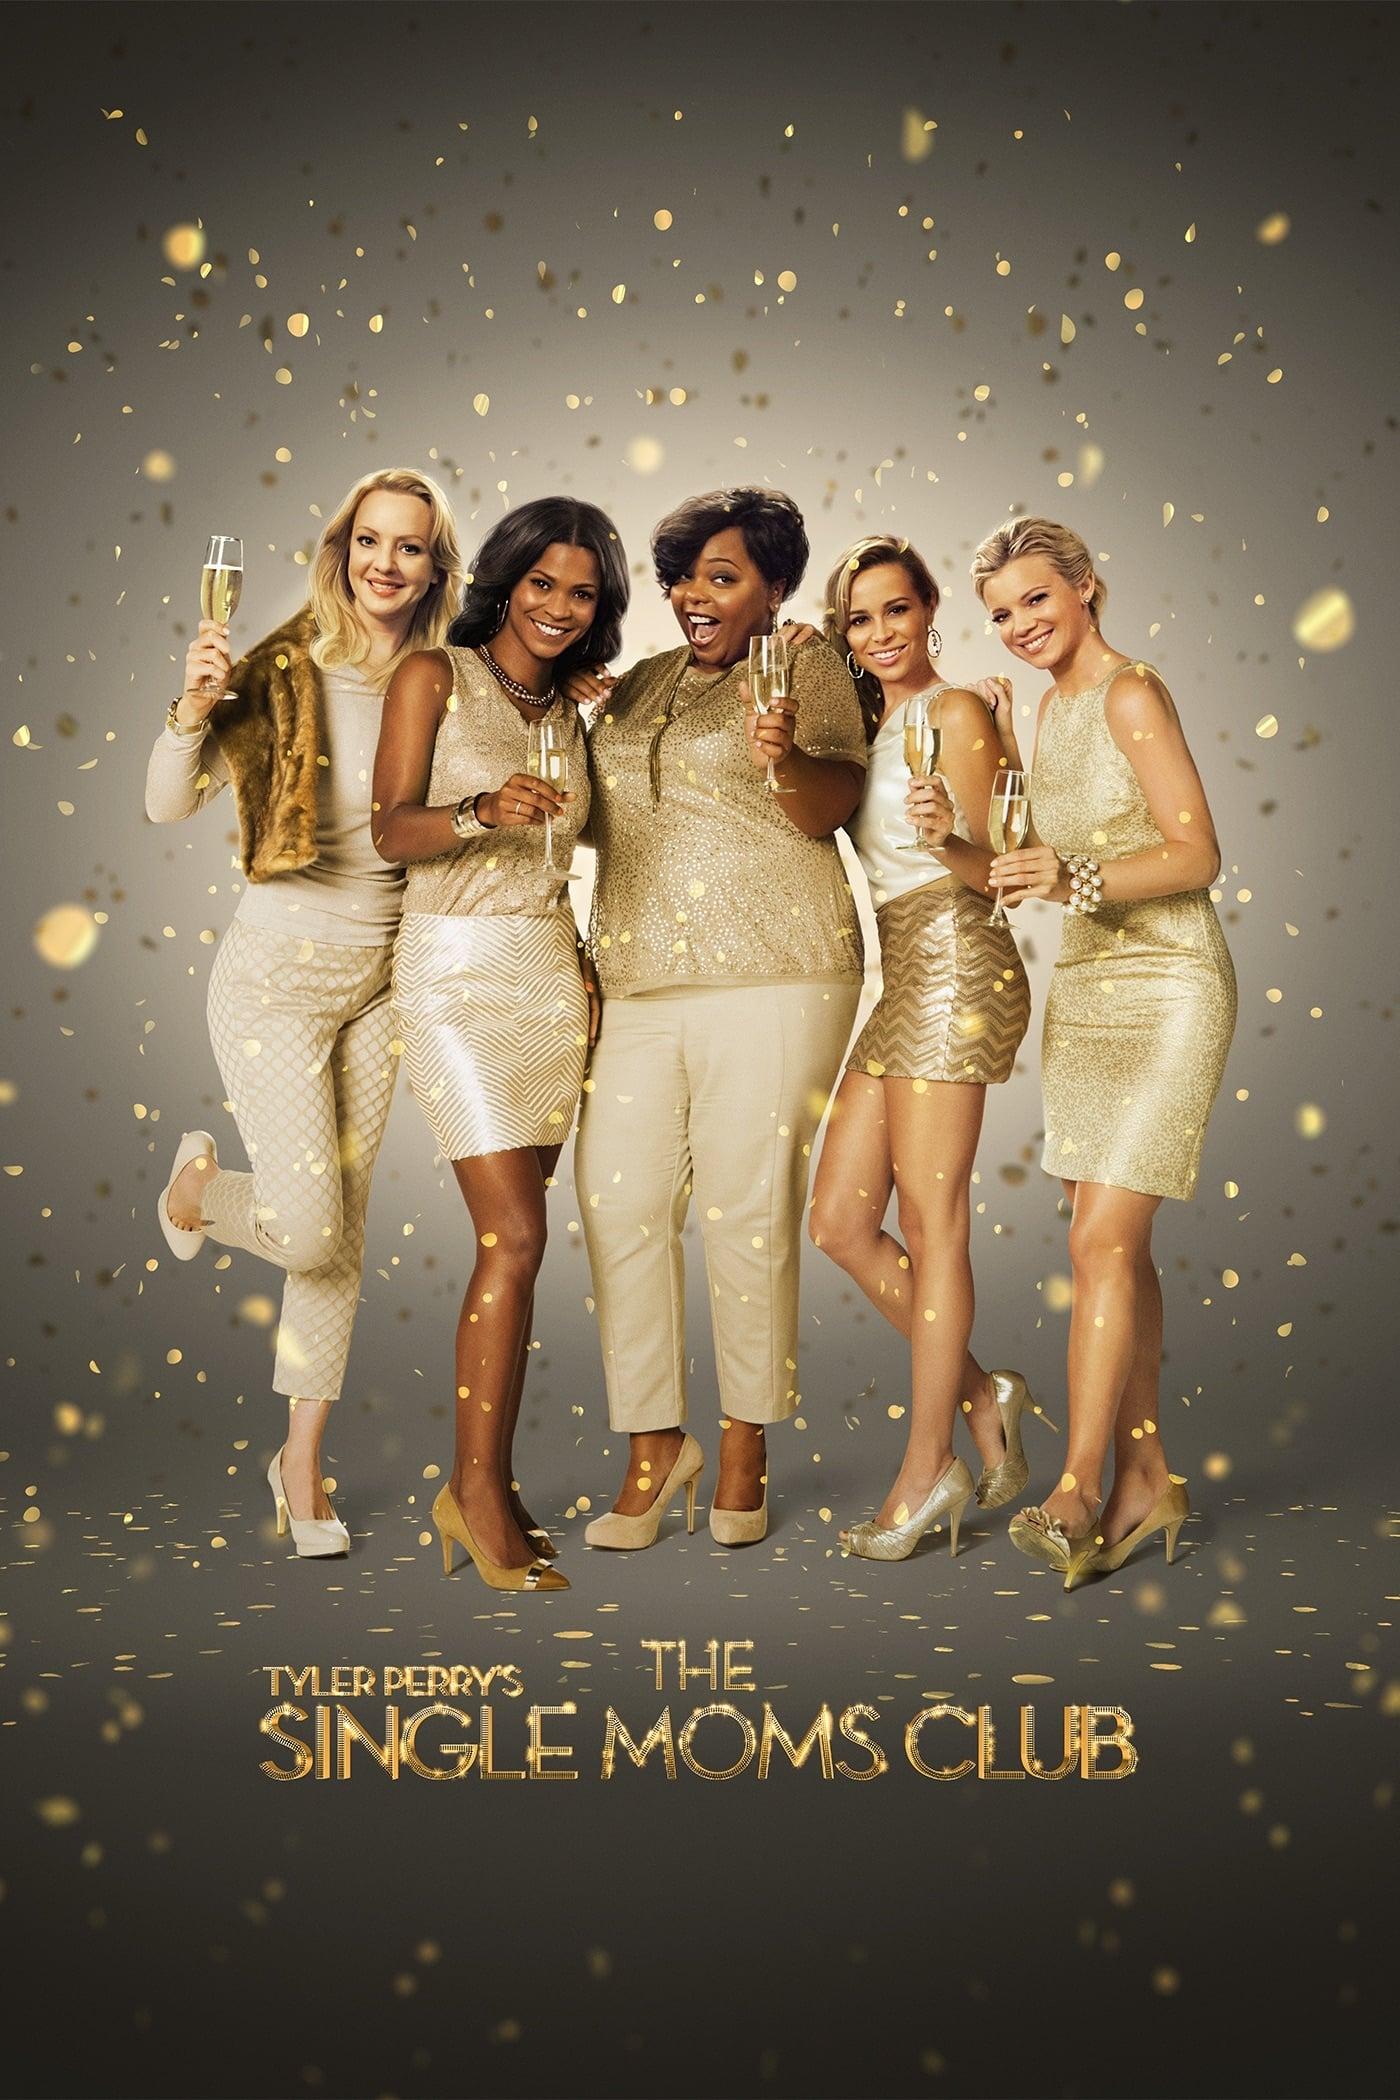 The Single Moms Club poster